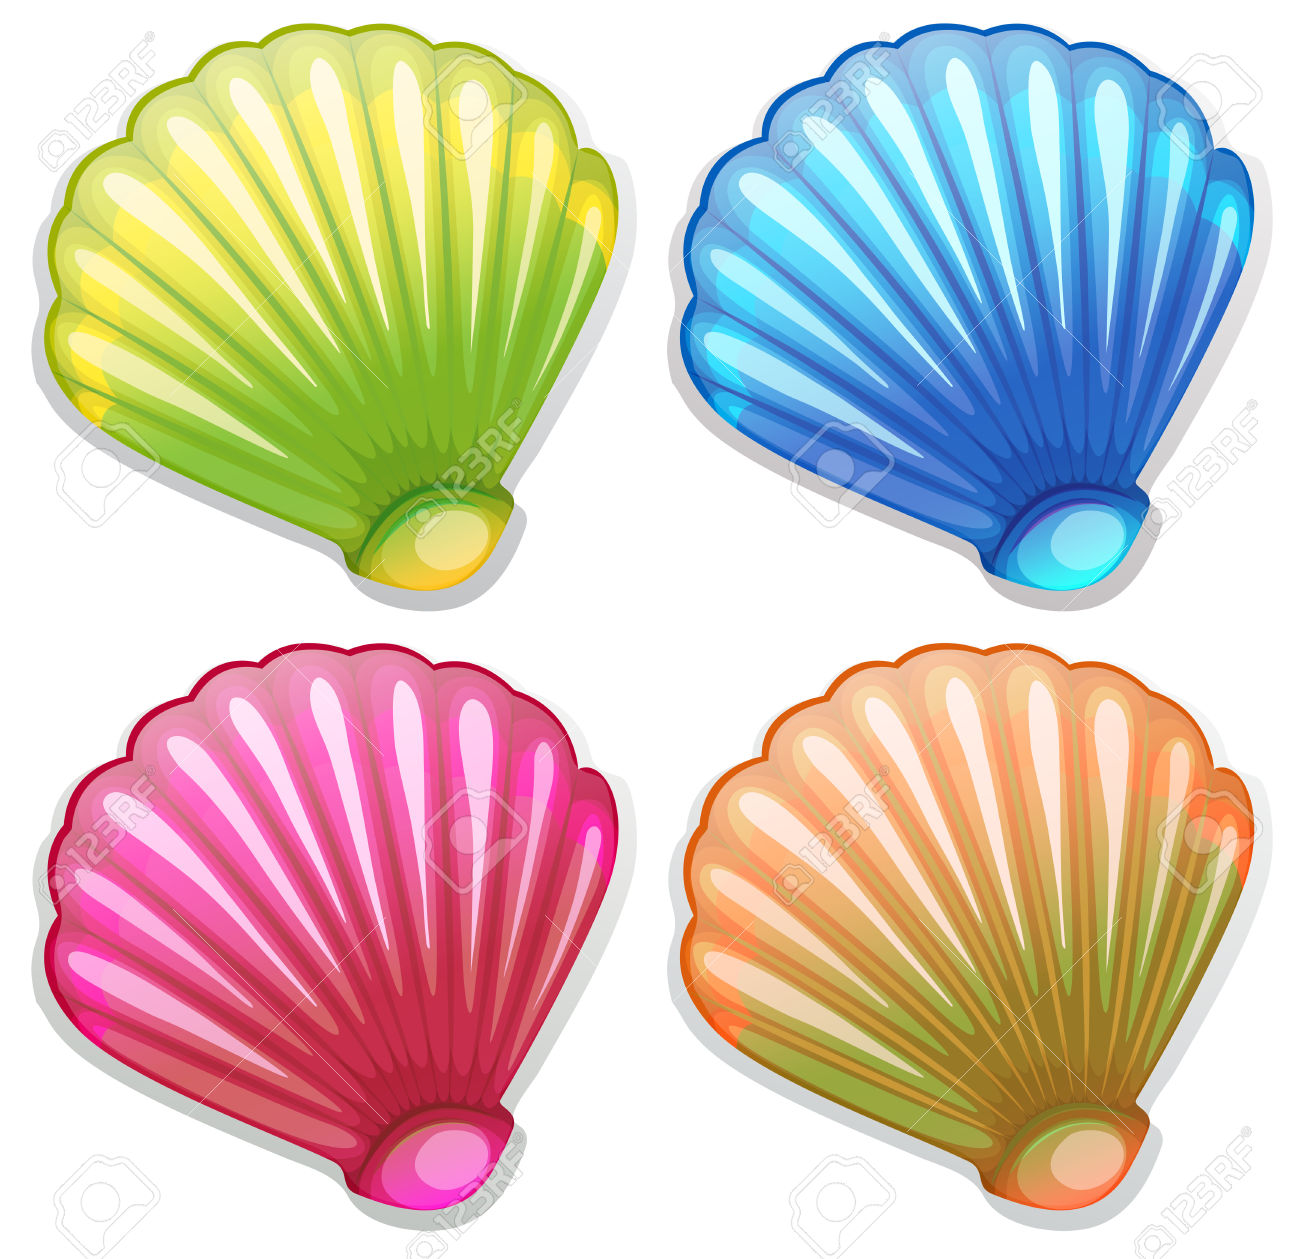 clipart,burano clipart,colorful clipart,driftwood clipart,seashell clip...